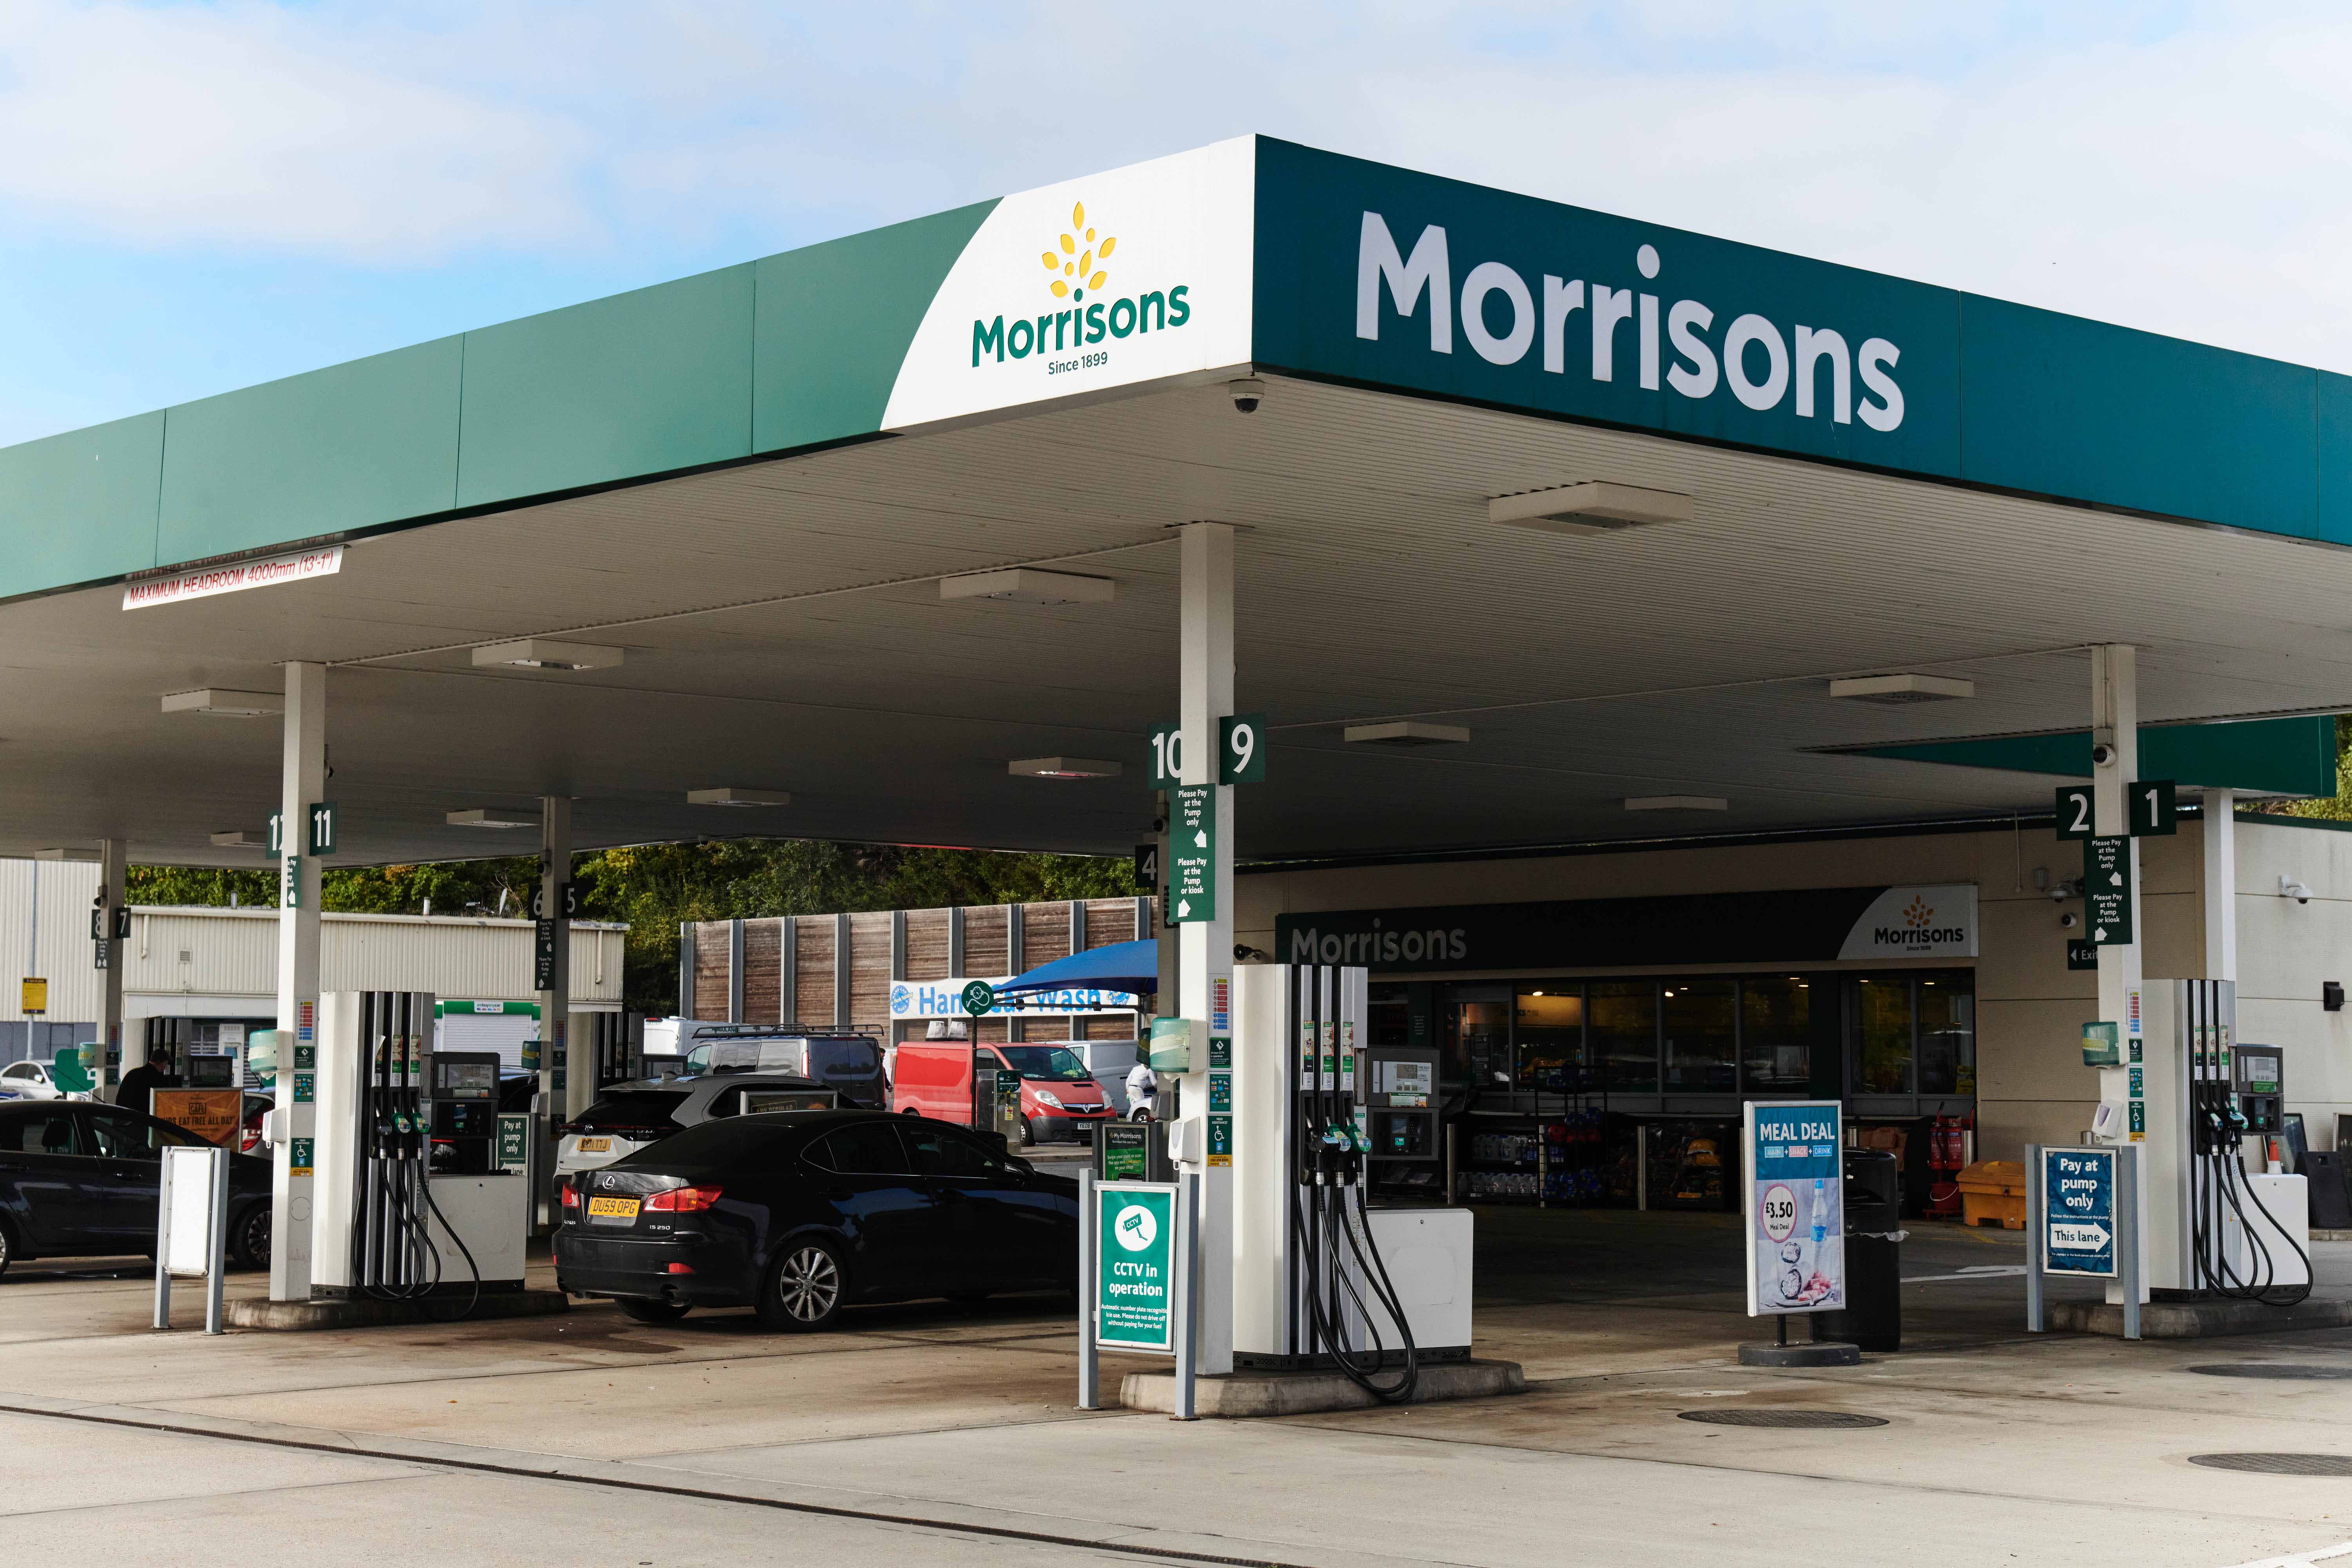 Fueled up: Morrisons helps customers save 5p off a litre of fuel at pumps